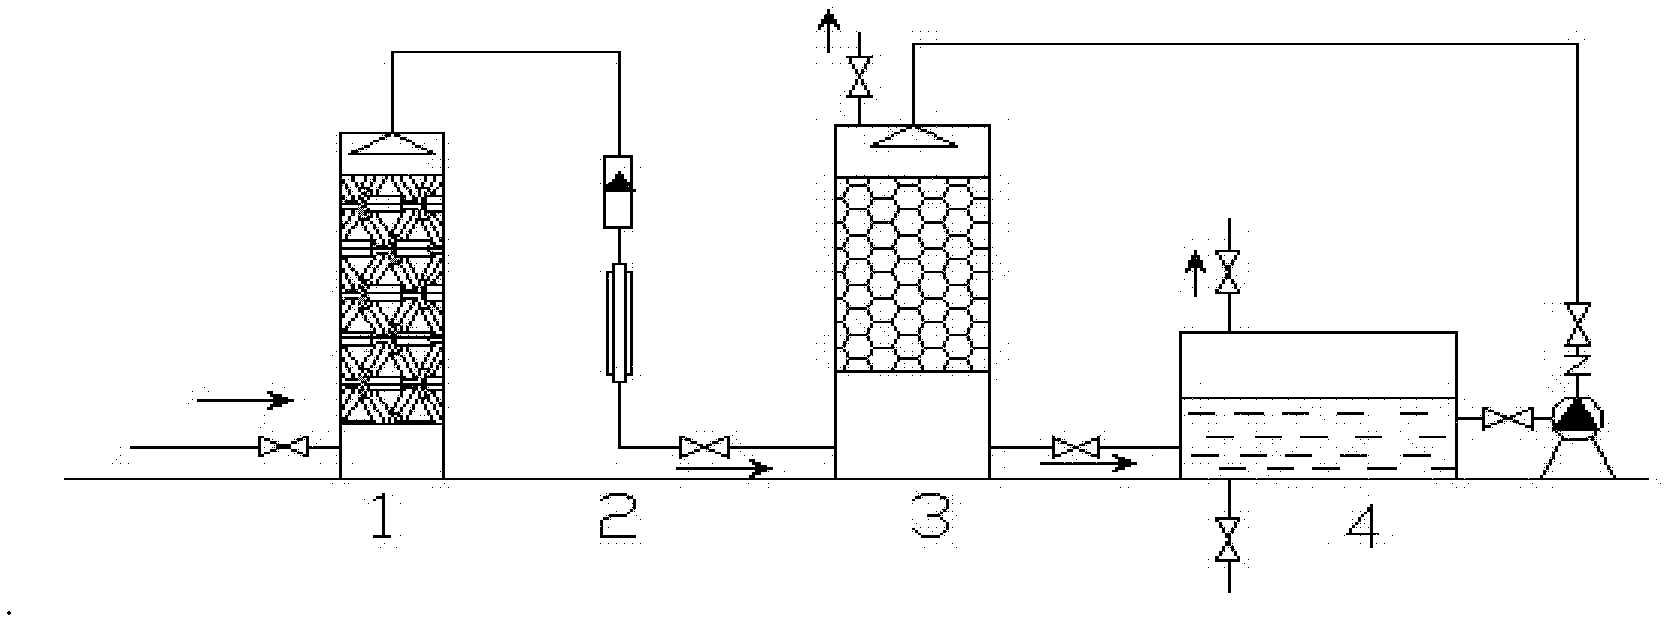 Method for removing VOCs by UV light catalytic oxidation cooperating with biofiltration